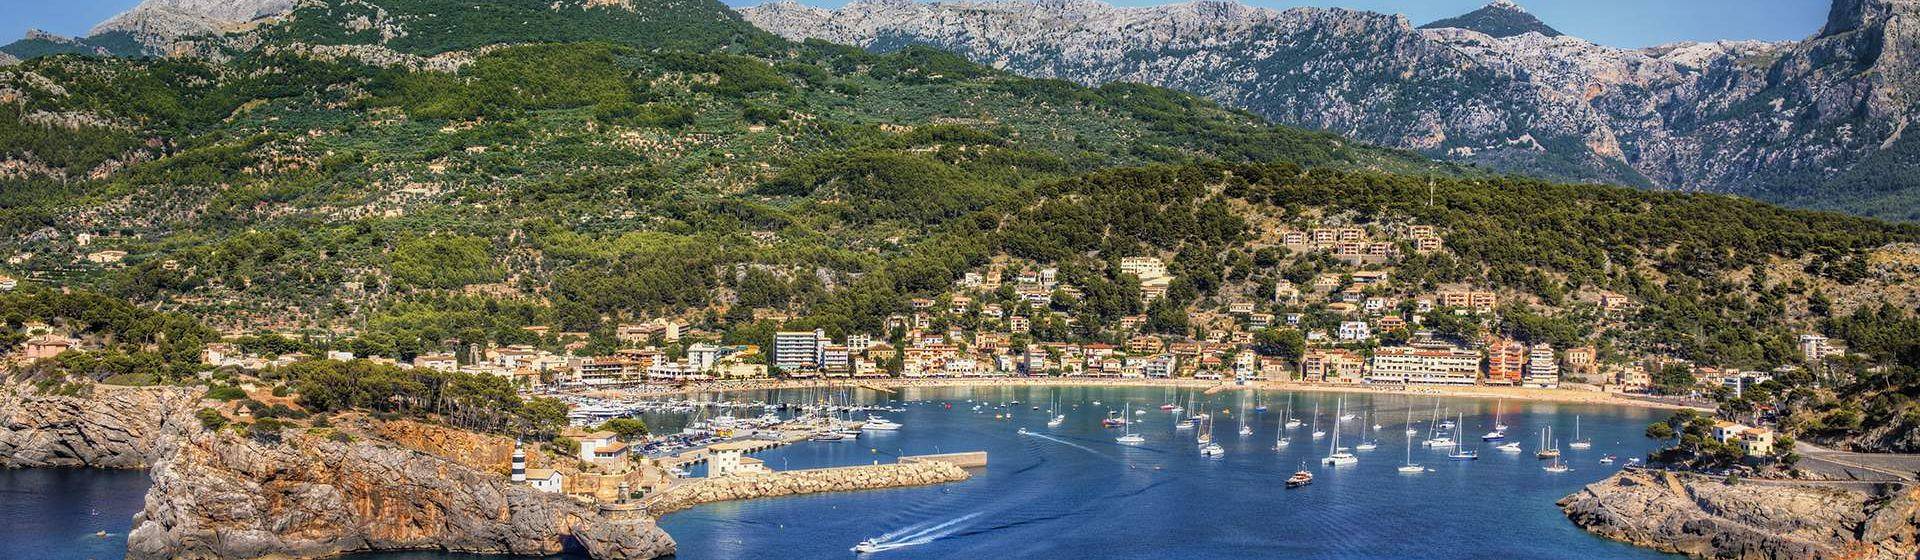 Holidays to Soller Image